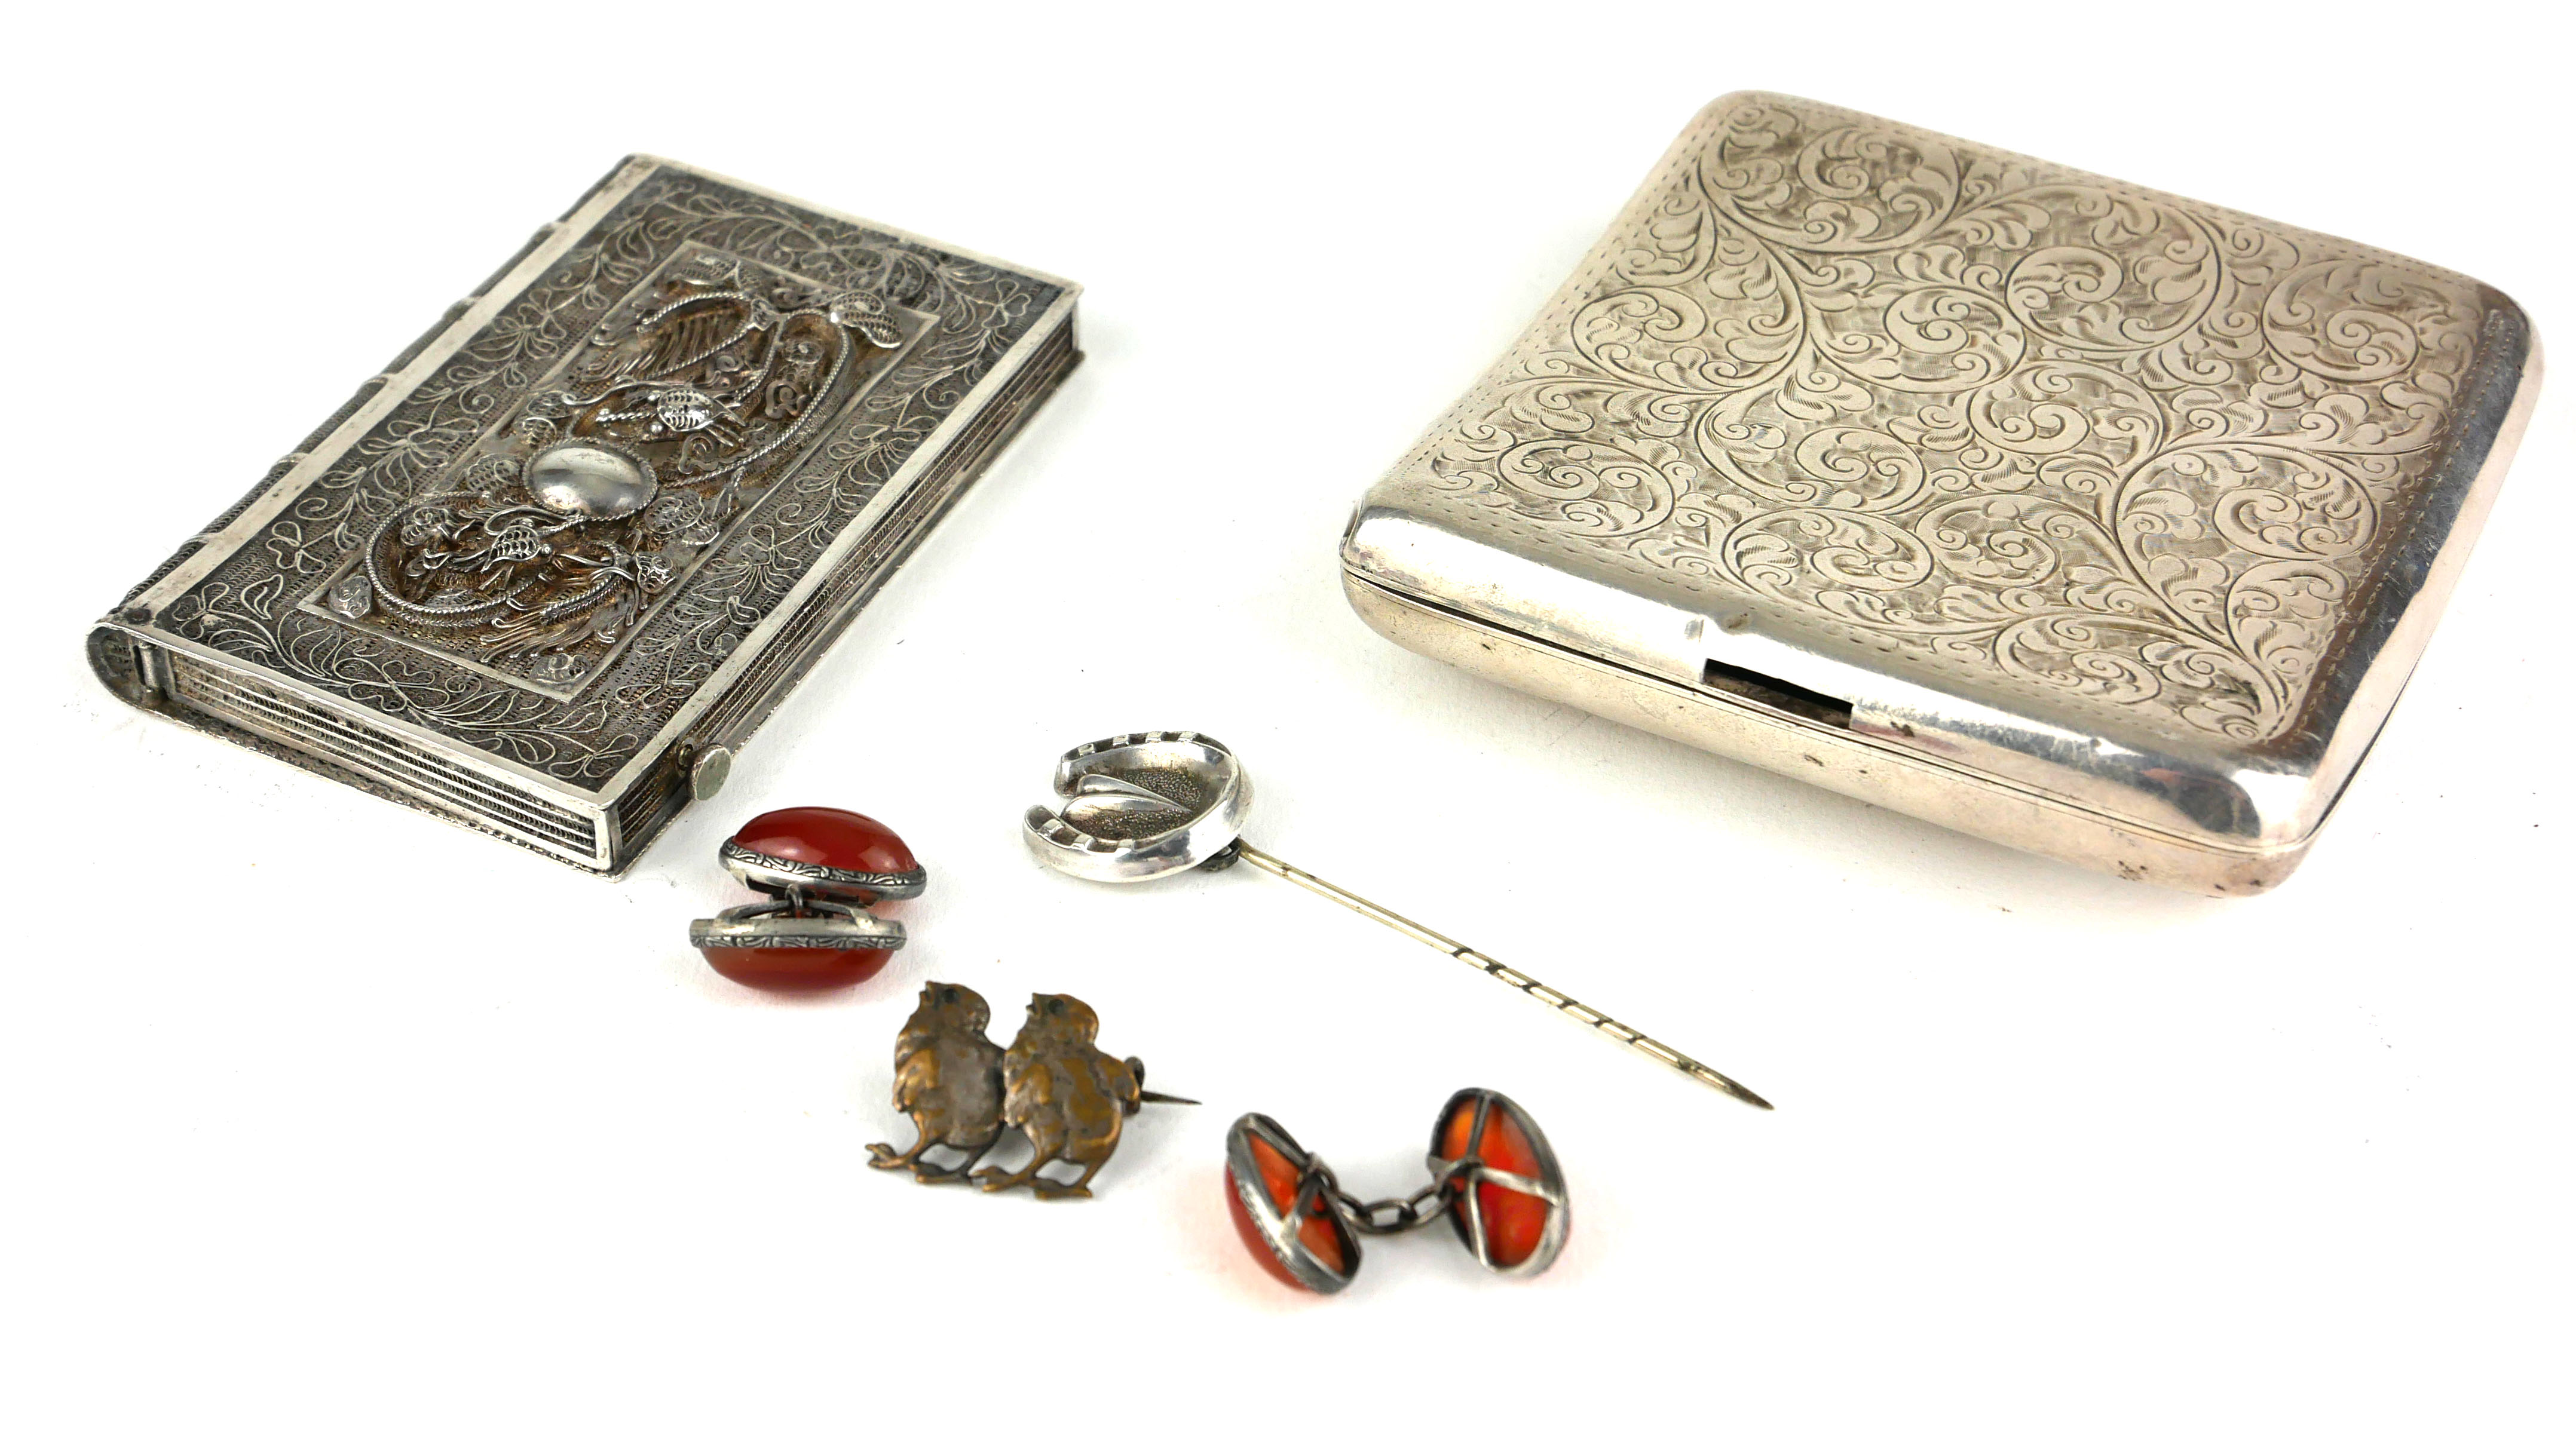 AN EARLY 20TH CENTURY WHITE METAL FILIGREE RECTANGULAR CALLING CARD CASE With applied wirework